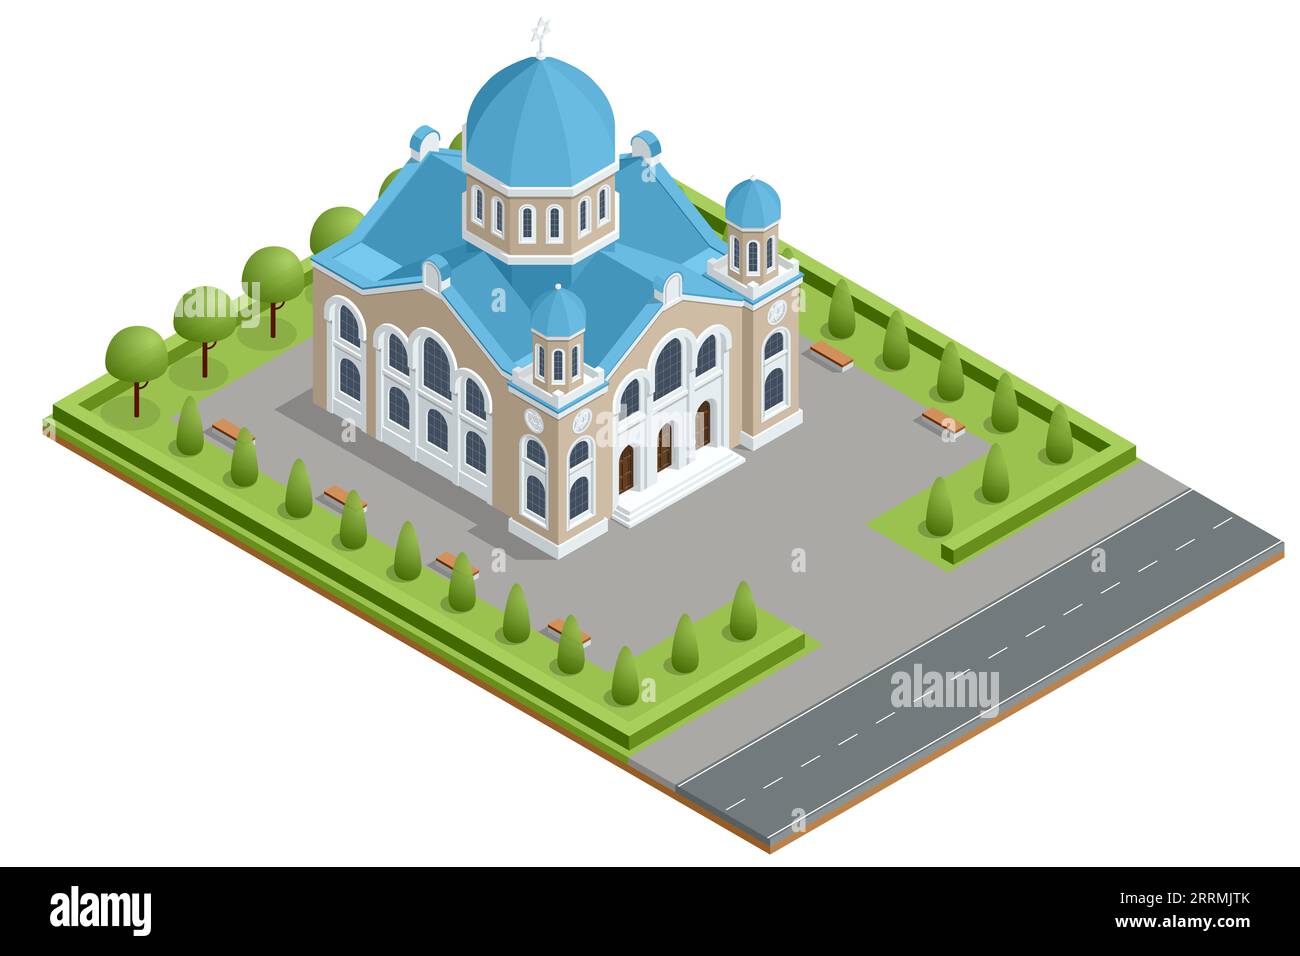 Isometric Synagogue Mosque Building. Synagogues are consecrated spaces used for the purpose of Jewish prayer, study, assembly, and reading of the Stock Vector